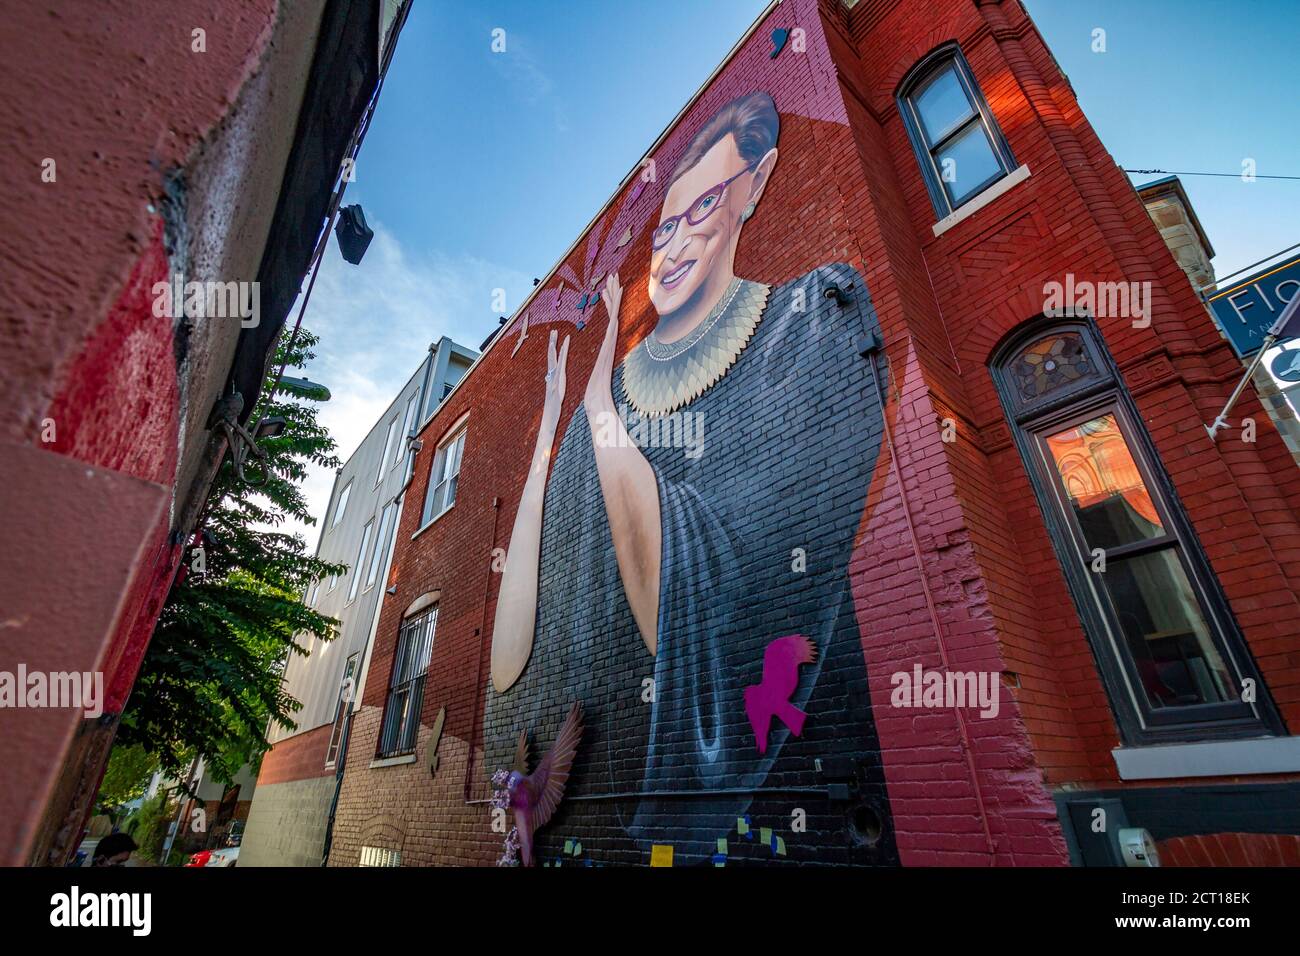 Washingtonians pay their respects to Justice Ruth Bader Ginsburg with messages and flowers at a mural in NW Washington, Saturday, 19 September 2020. Stock Photo